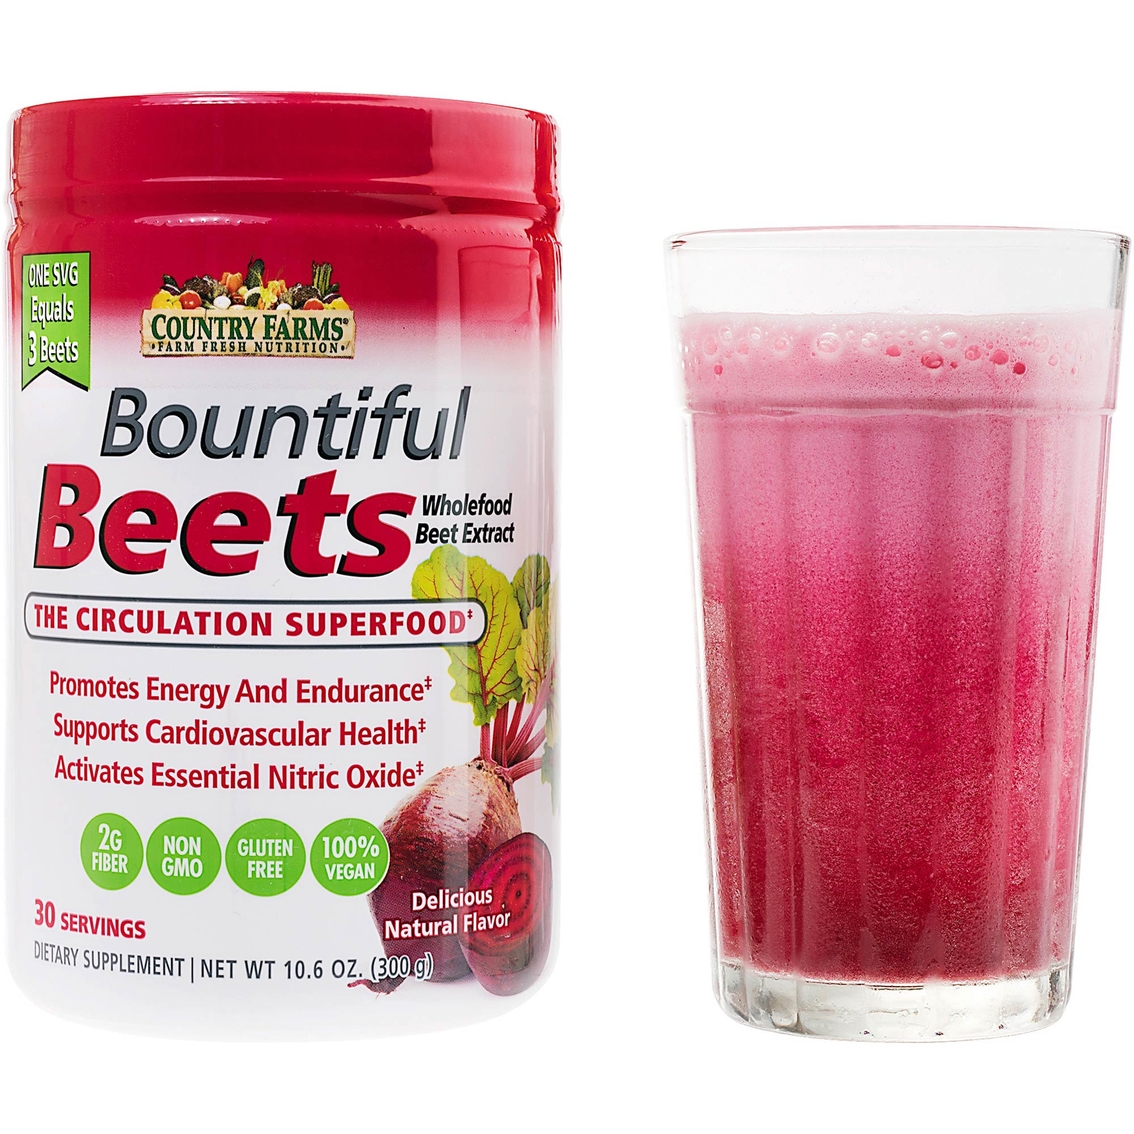 Country Farms Bountiful Beets 10.6 oz. - Image 5 of 7